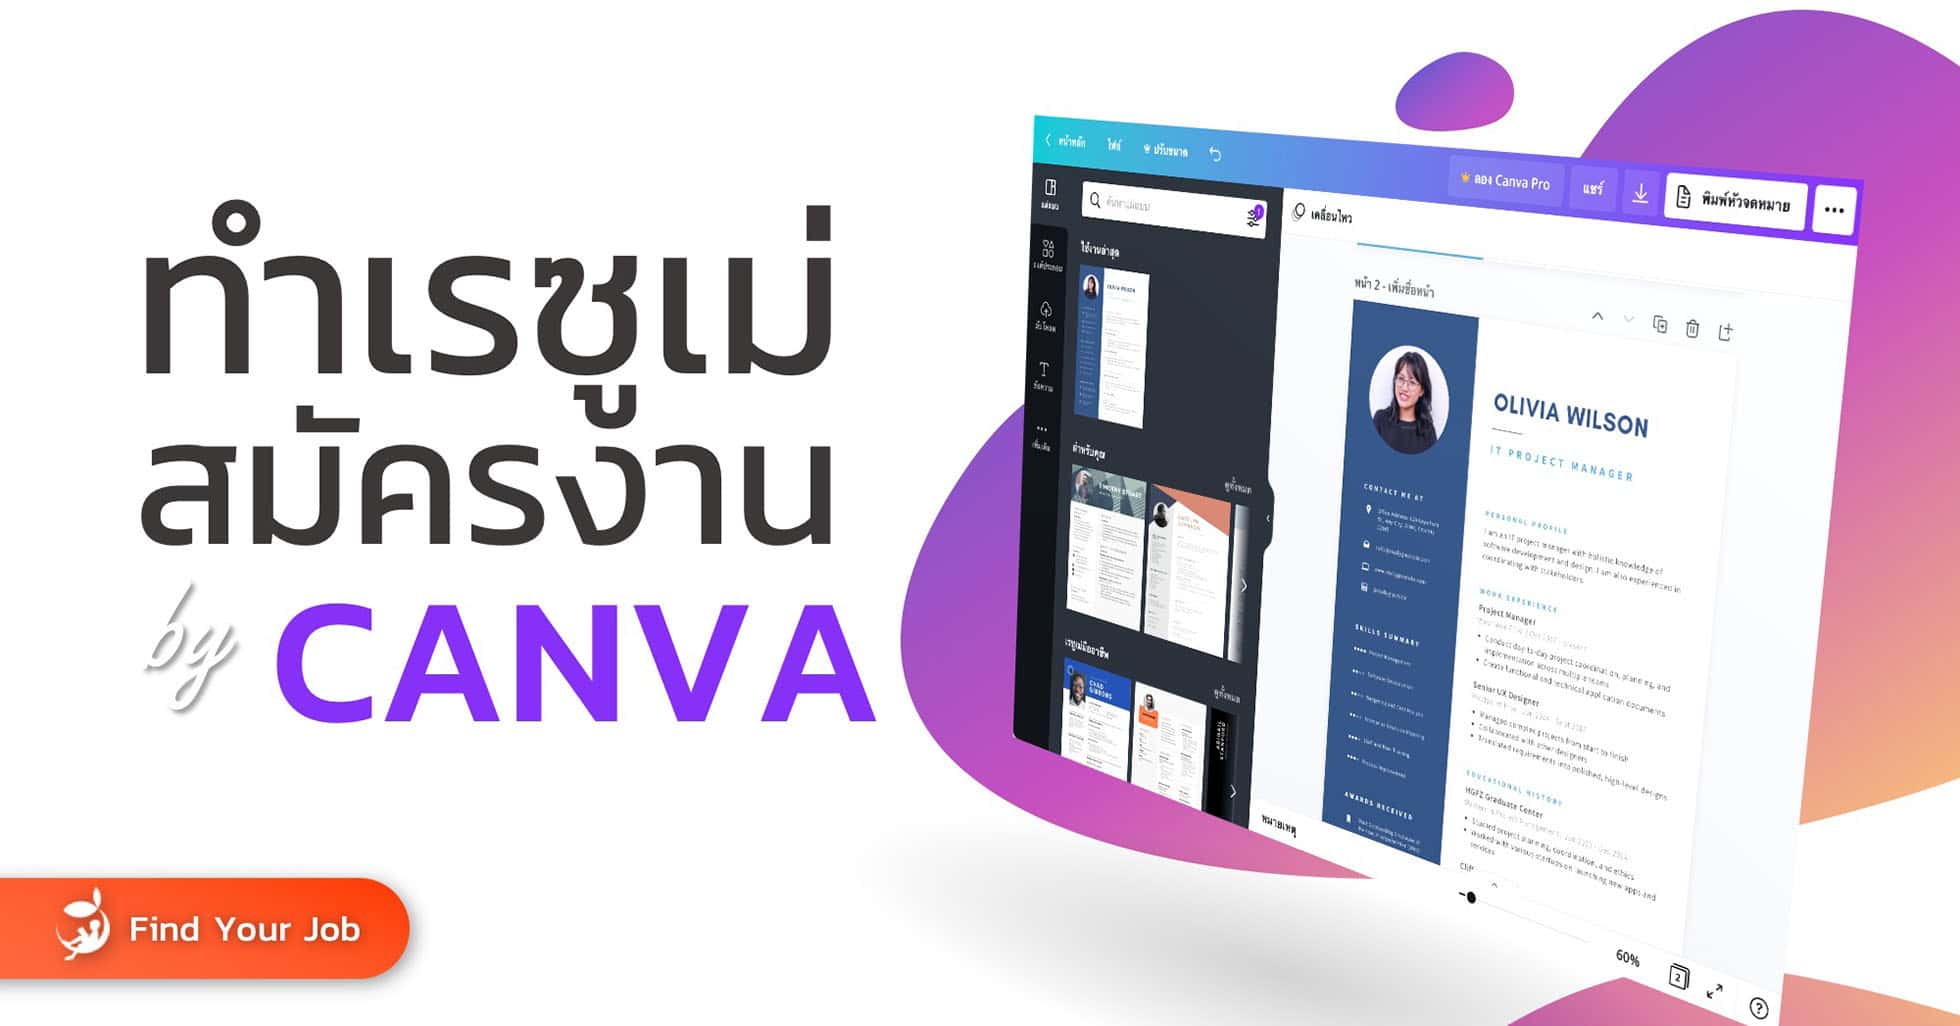 Cover ทำเรซูเม่สมัครงานด้วย Canva by Find Your Job